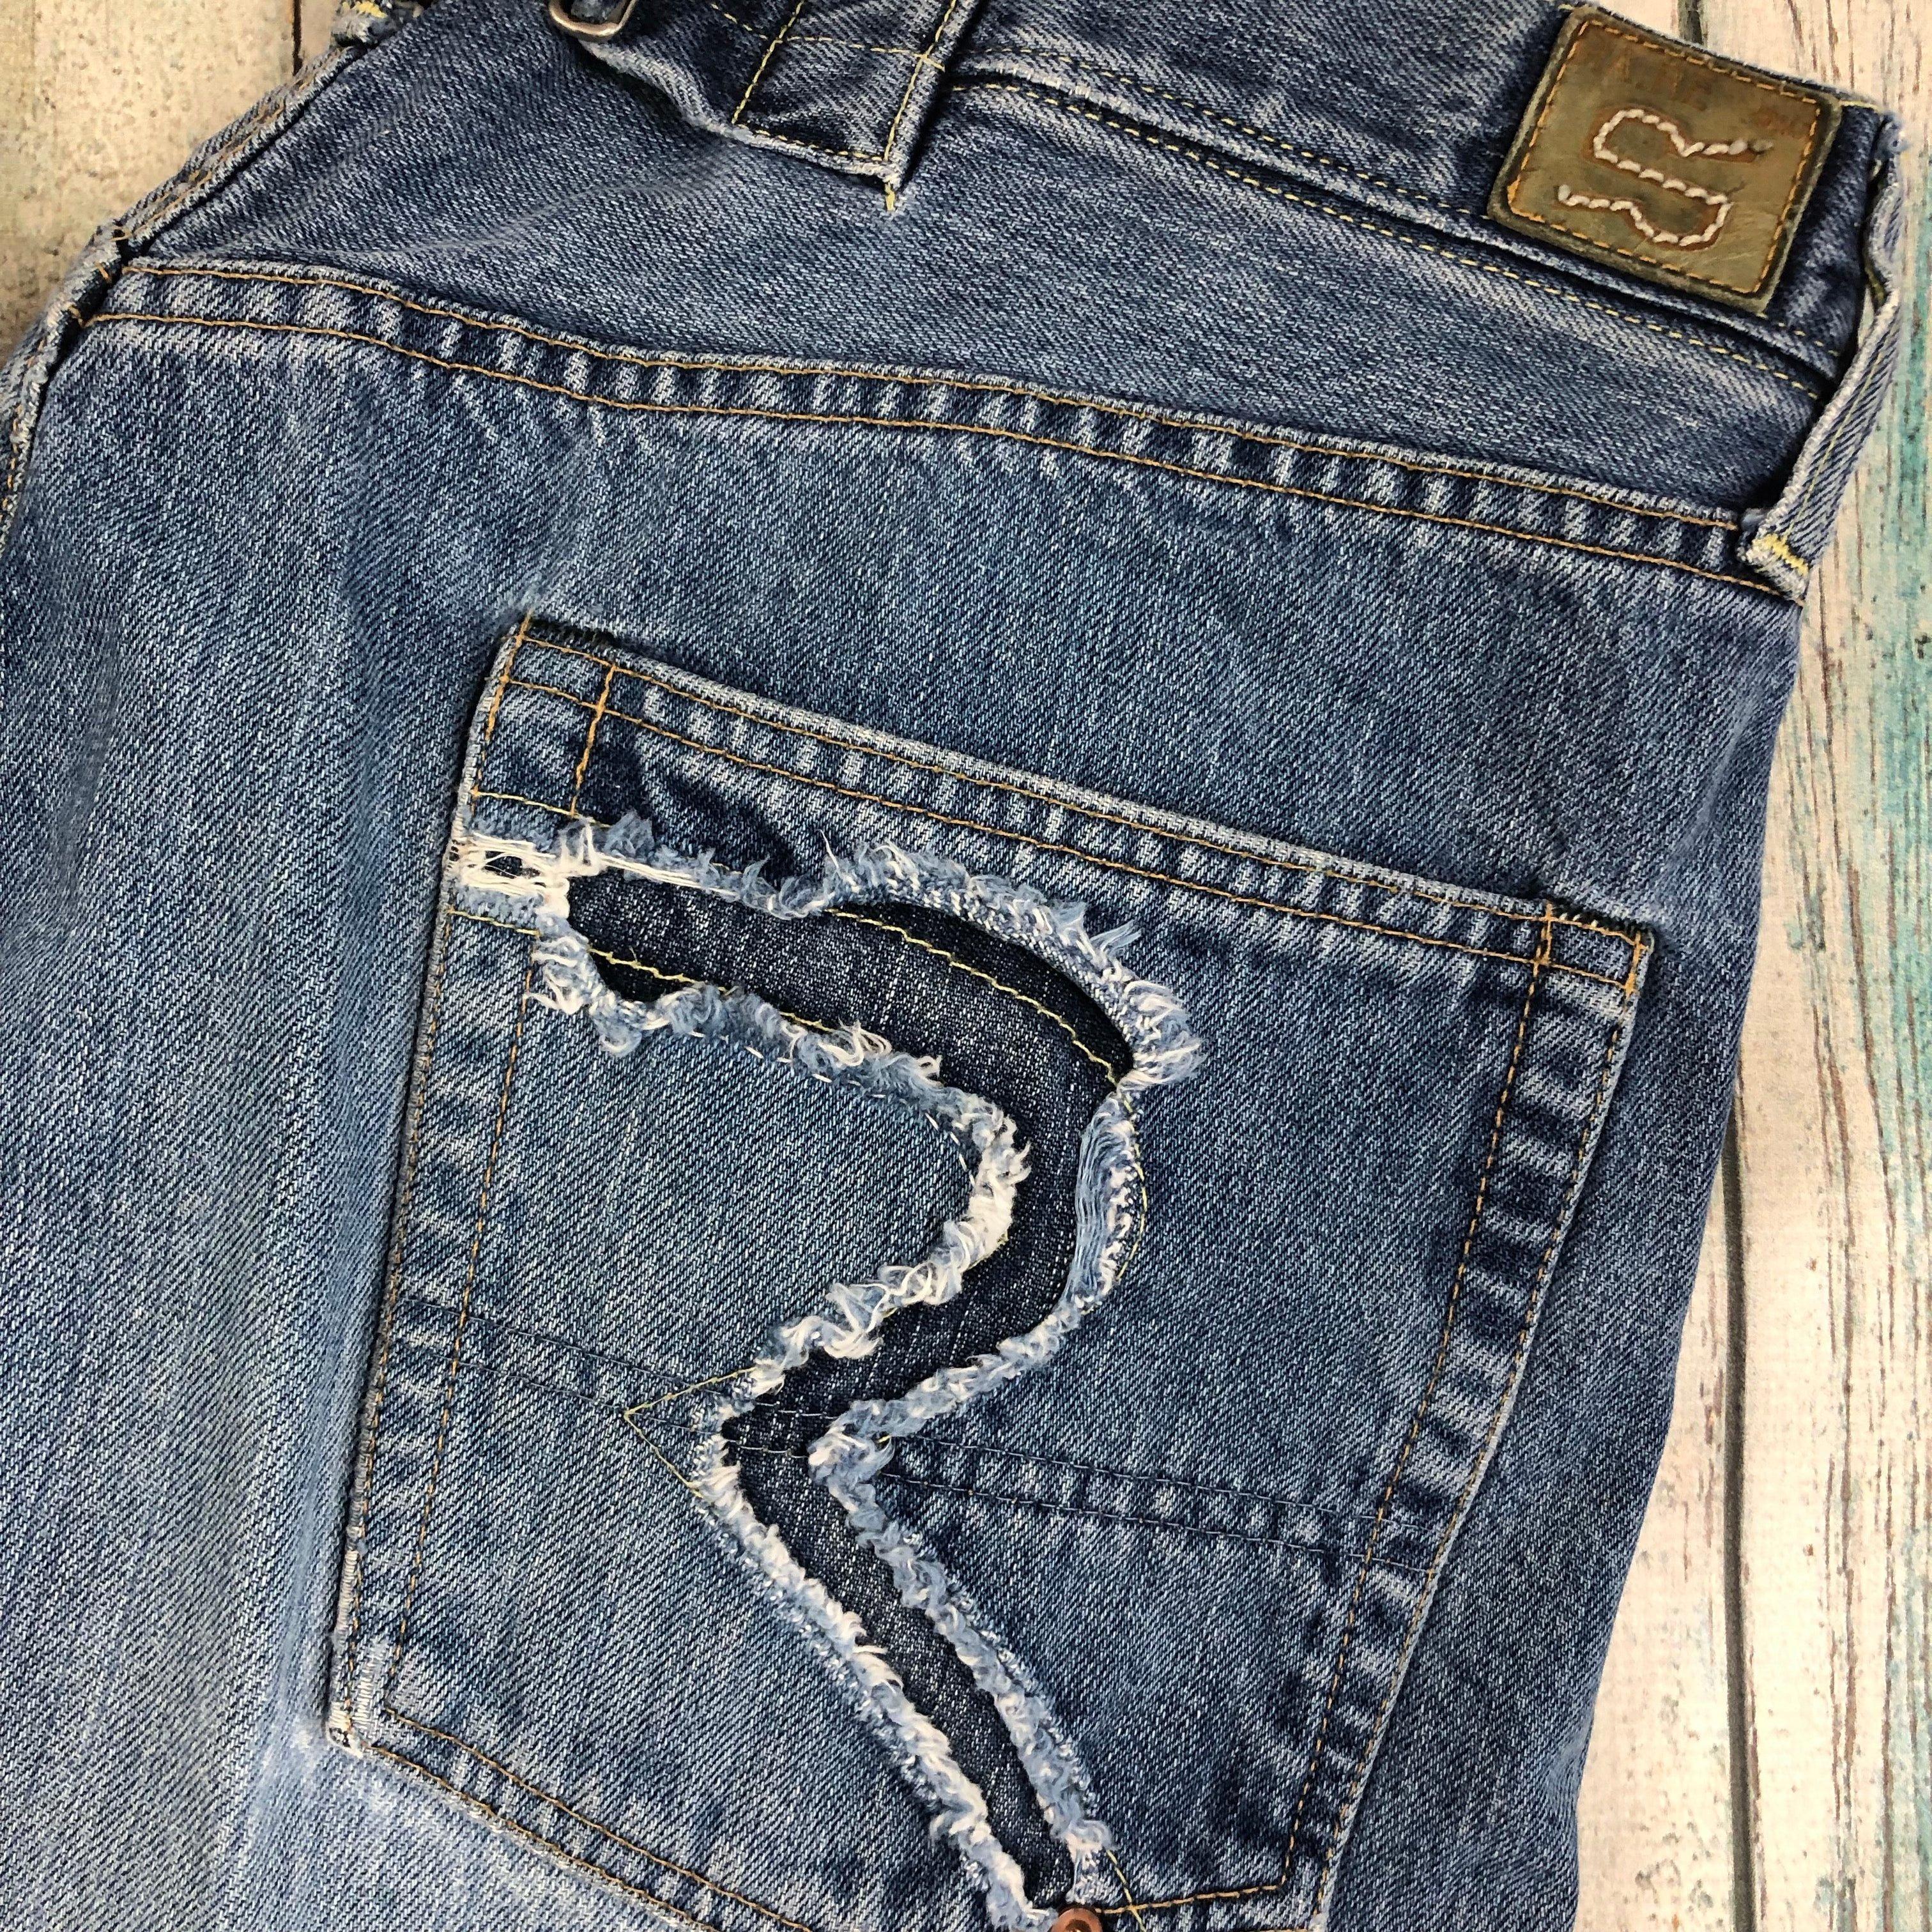 rag recycle jeans